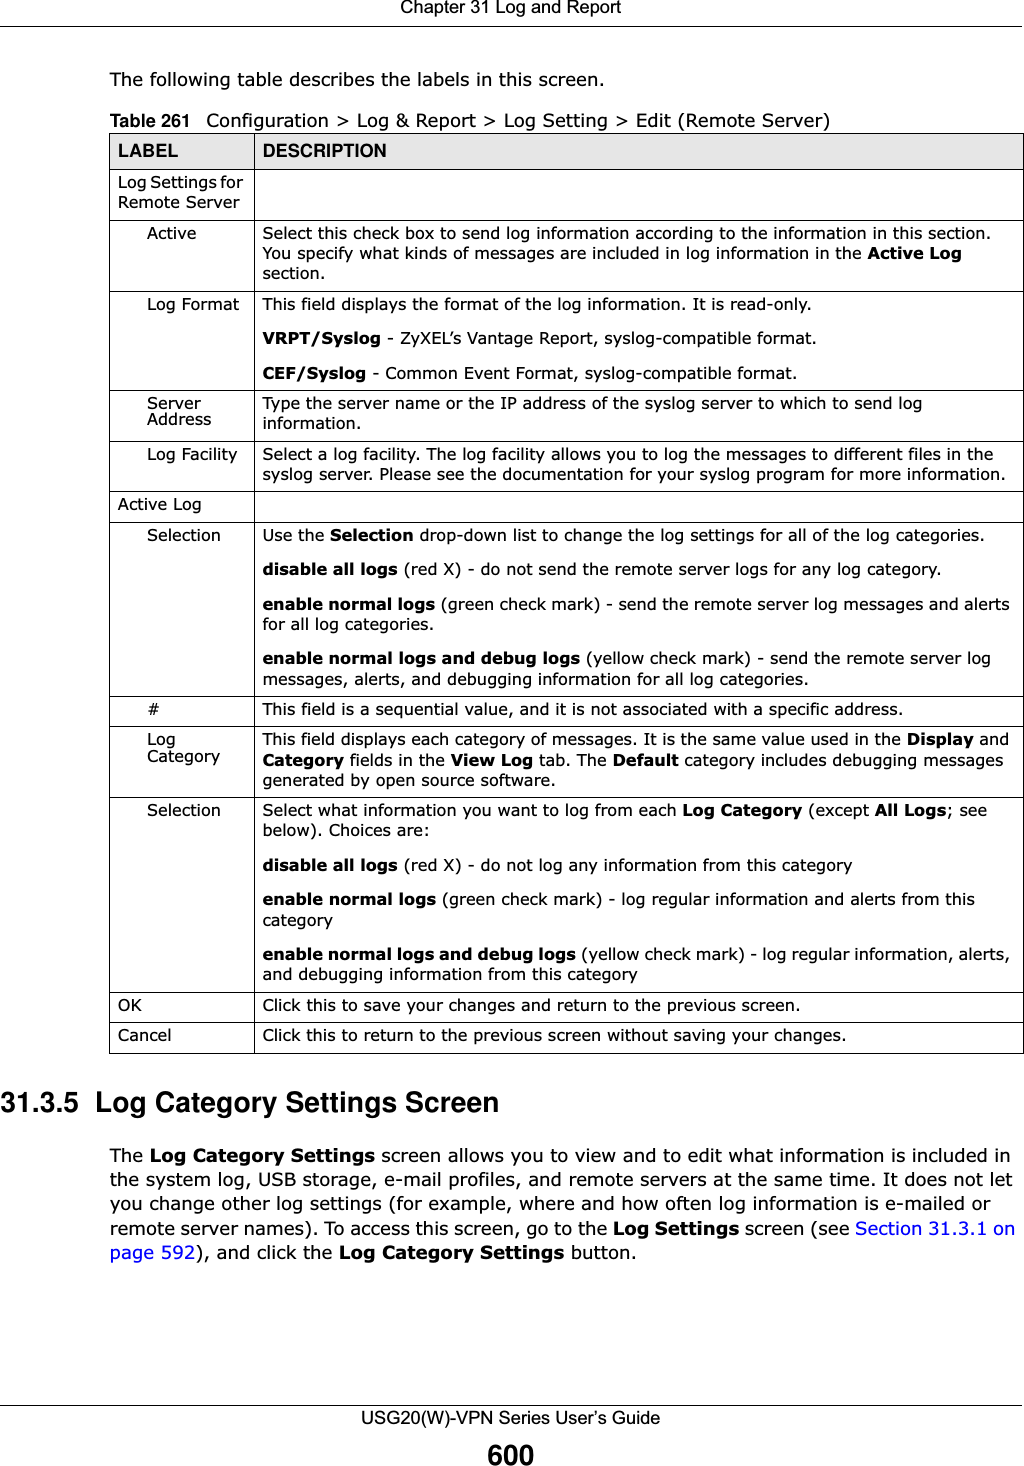 Chapter 31 Log and ReportUSG20(W)-VPN Series User’s Guide600The following table describes the labels in this screen.  31.3.5  Log Category Settings ScreenThe Log Category Settings screen allows you to view and to edit what information is included in the system log, USB storage, e-mail profiles, and remote servers at the same time. It does not let you change other log settings (for example, where and how often log information is e-mailed or remote server names). To access this screen, go to the Log Settings screen (see Section 31.3.1 on page 592), and click the Log Category Settings button.Table 261   Configuration &gt; Log &amp; Report &gt; Log Setting &gt; Edit (Remote Server)LABEL DESCRIPTIONLog Settings for Remote ServerActive Select this check box to send log information according to the information in this section. You specify what kinds of messages are included in log information in the Active Log section.Log Format This field displays the format of the log information. It is read-only.VRPT/Syslog - ZyXEL’s Vantage Report, syslog-compatible format.CEF/Syslog - Common Event Format, syslog-compatible format.Server Address Type the server name or the IP address of the syslog server to which to send log information.Log Facility Select a log facility. The log facility allows you to log the messages to different files in the syslog server. Please see the documentation for your syslog program for more information.Active LogSelection Use the Selection drop-down list to change the log settings for all of the log categories.disable all logs (red X) - do not send the remote server logs for any log category.enable normal logs (green check mark) - send the remote server log messages and alerts for all log categories. enable normal logs and debug logs (yellow check mark) - send the remote server log messages, alerts, and debugging information for all log categories. # This field is a sequential value, and it is not associated with a specific address.Log Category This field displays each category of messages. It is the same value used in the Display and Category fields in the View Log tab. The Default category includes debugging messages generated by open source software.Selection Select what information you want to log from each Log Category (except All Logs; see below). Choices are:disable all logs (red X) - do not log any information from this categoryenable normal logs (green check mark) - log regular information and alerts from this categoryenable normal logs and debug logs (yellow check mark) - log regular information, alerts, and debugging information from this categoryOK Click this to save your changes and return to the previous screen.Cancel Click this to return to the previous screen without saving your changes.